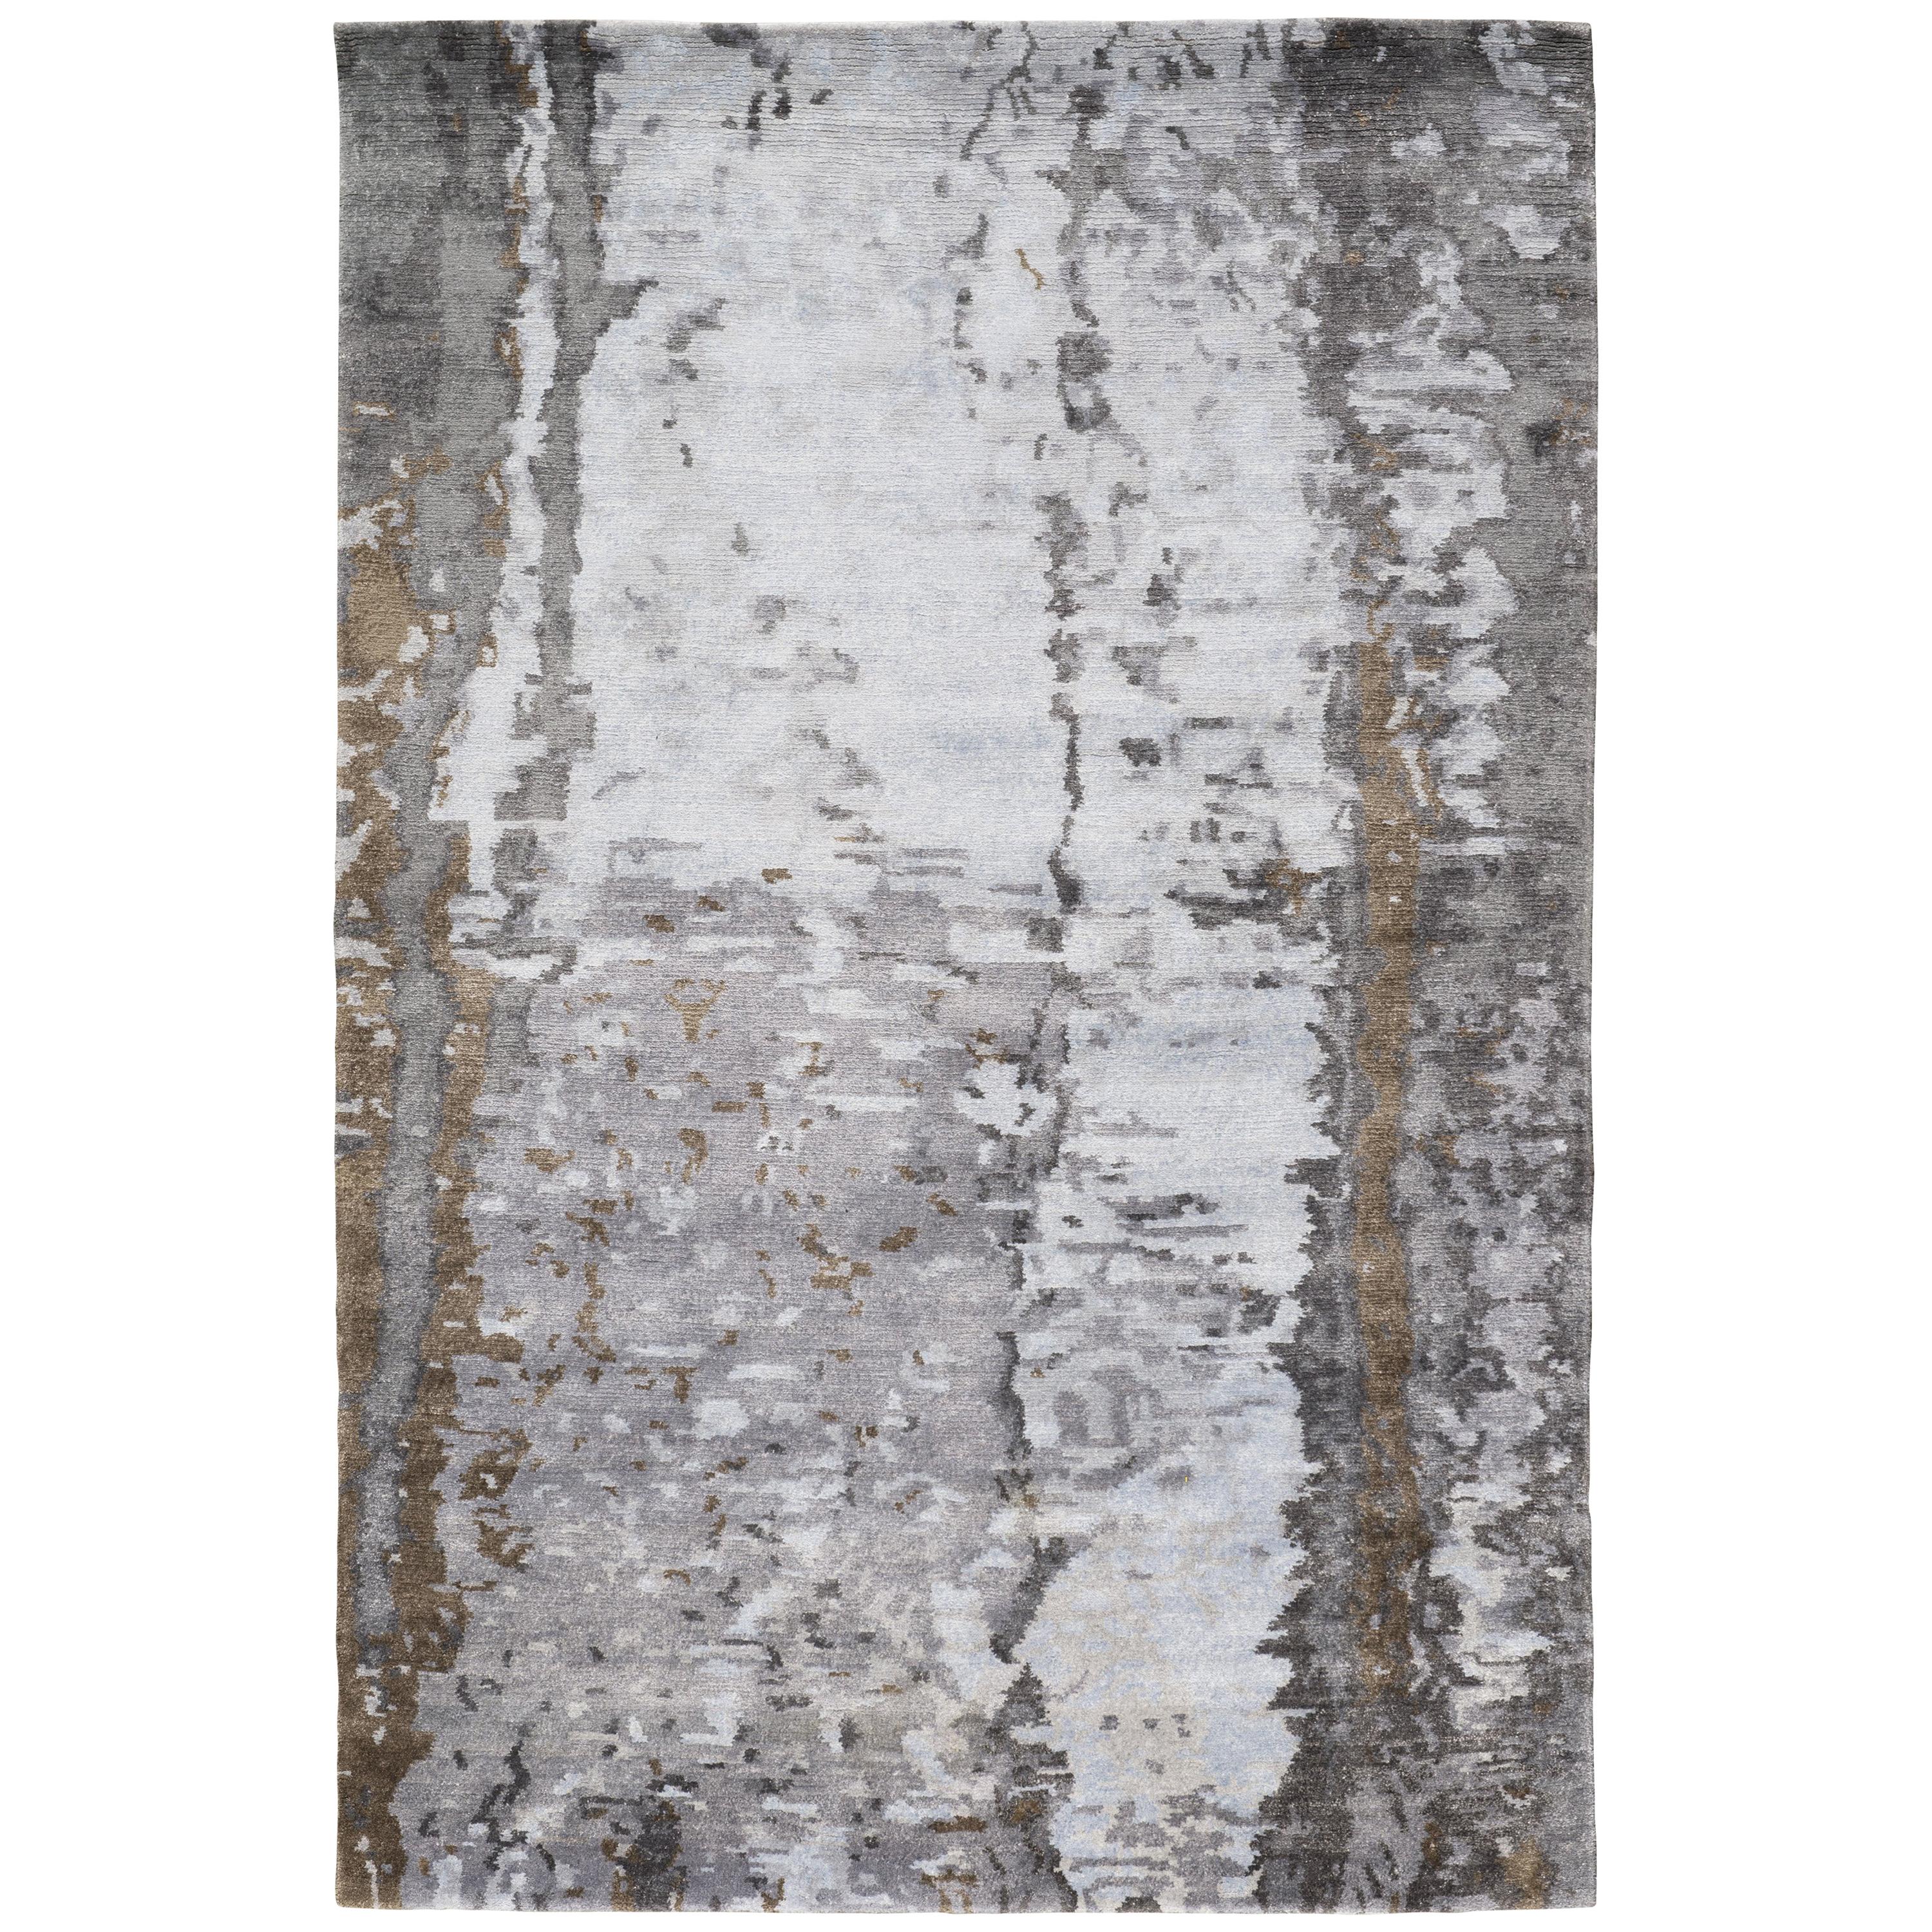 Tidal Moonlight Hand-Knotted 10x8 Rug in Bamboo Silk by David Rockwell